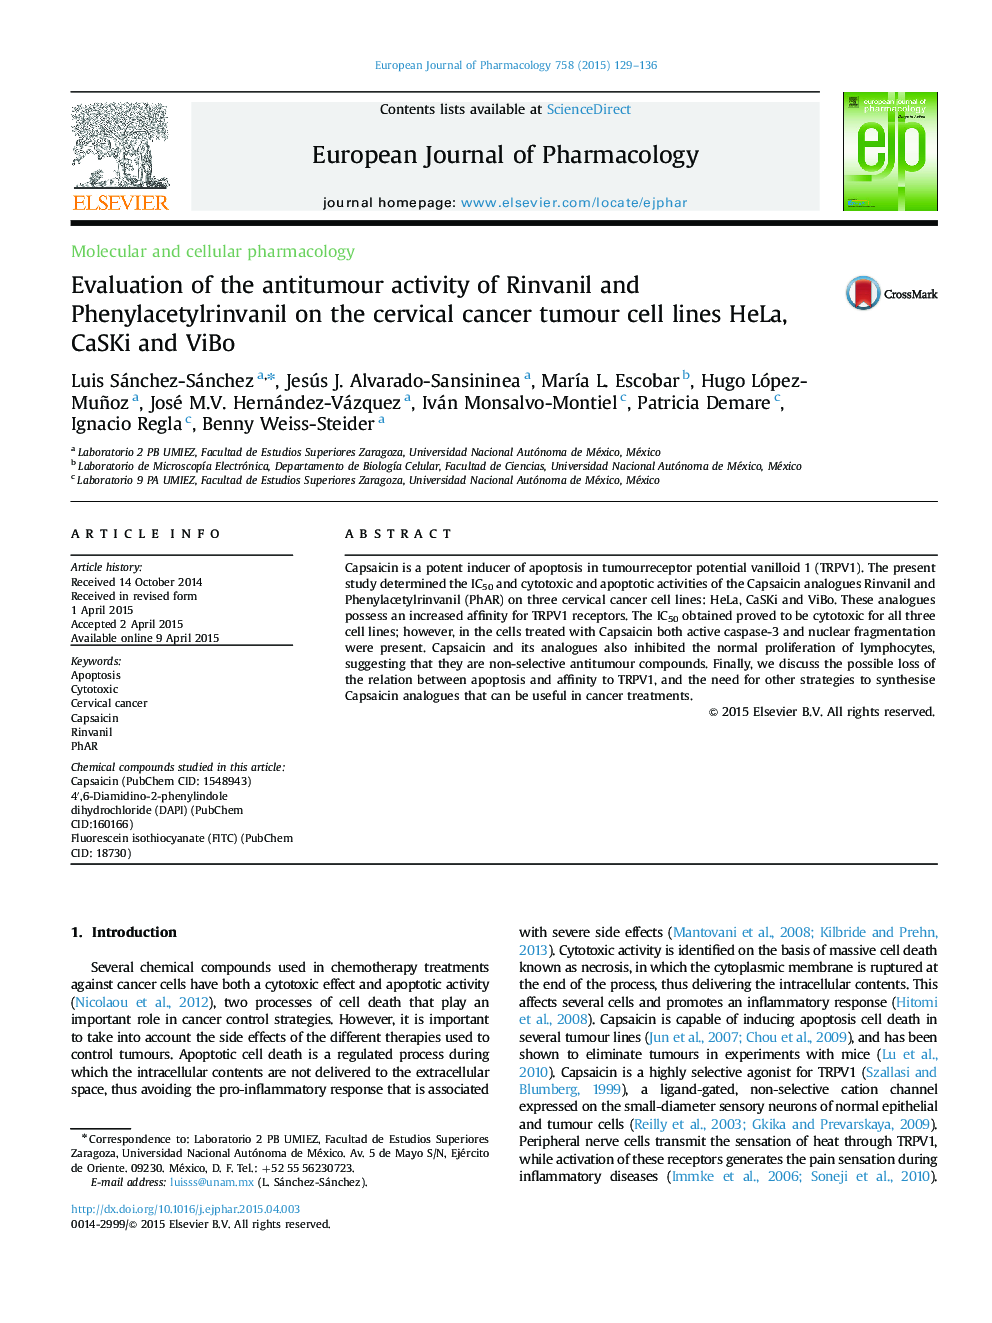 Molecular and cellular pharmacologyEvaluation of the antitumour activity of Rinvanil and Phenylacetylrinvanil on the cervical cancer tumour cell lines HeLa, CaSKi and ViBo